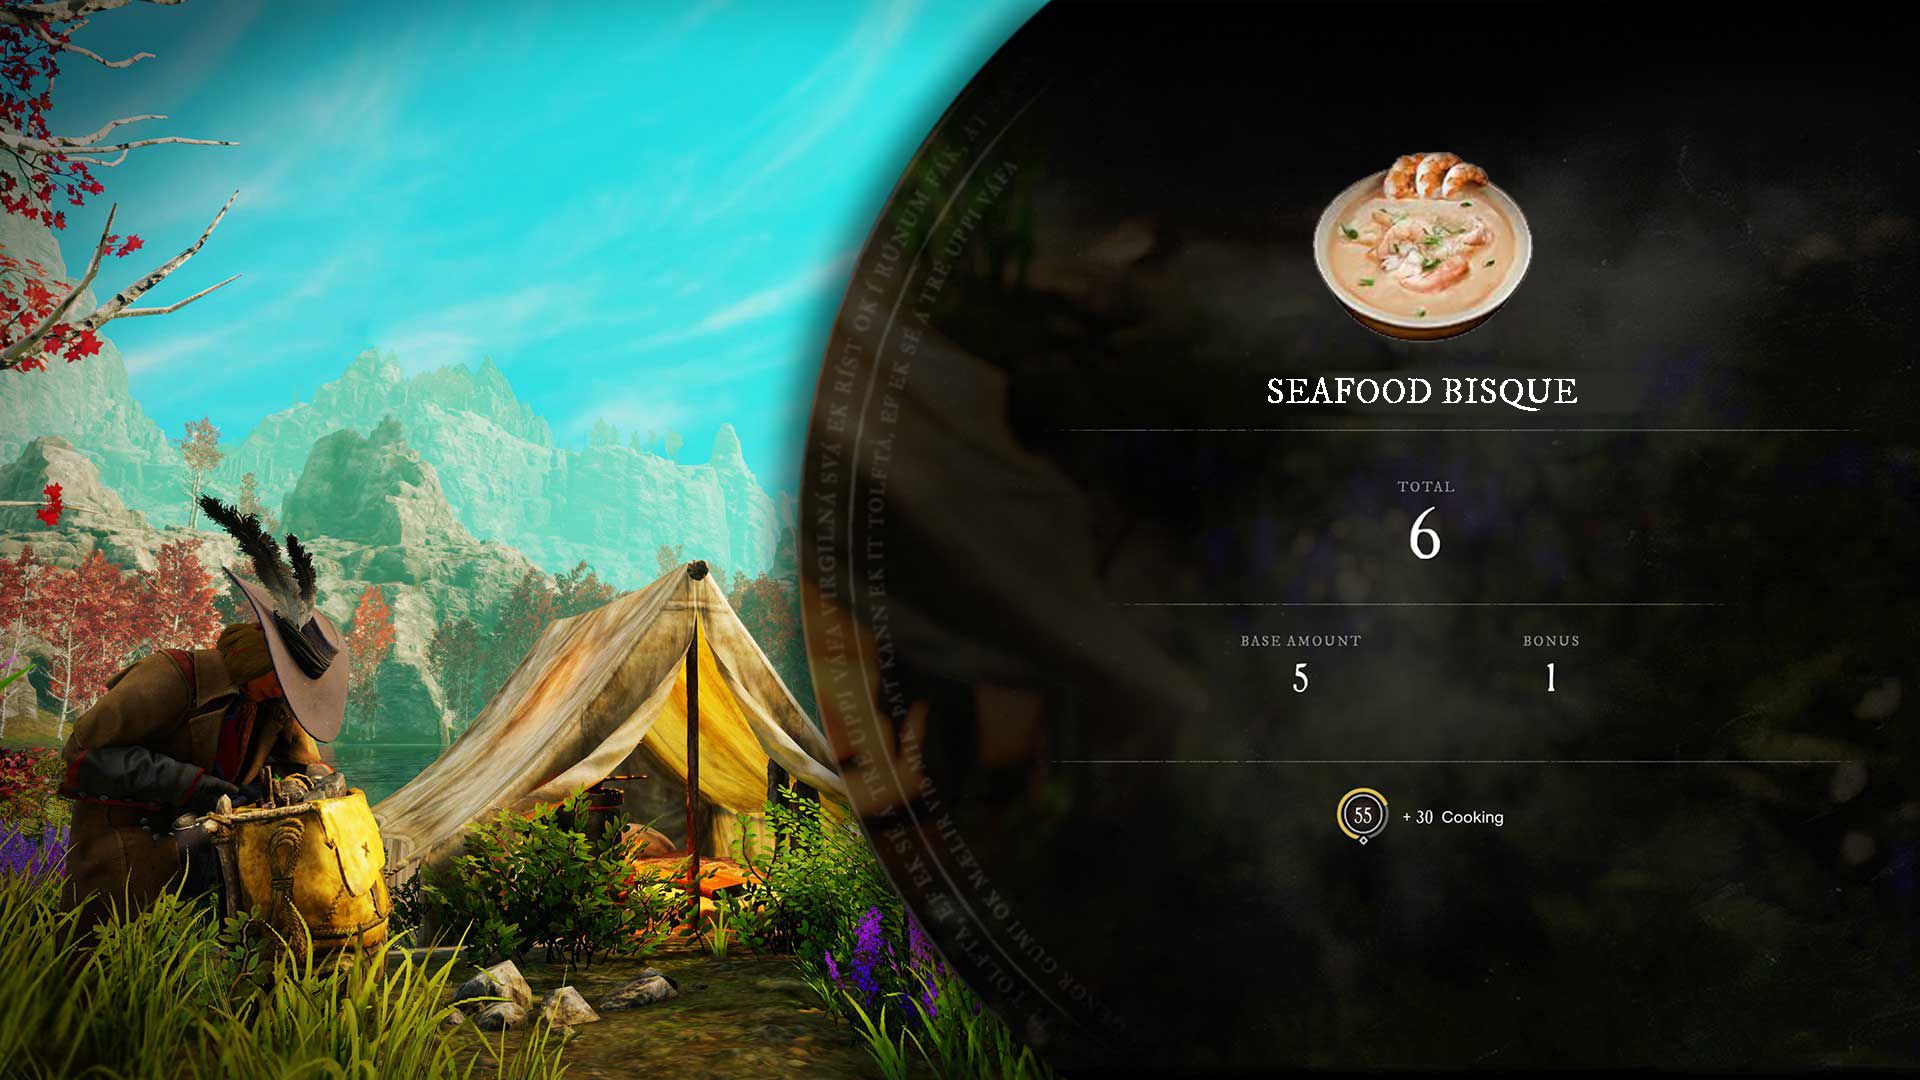 A player cooks a Seafood Bisque recipe at a campsite